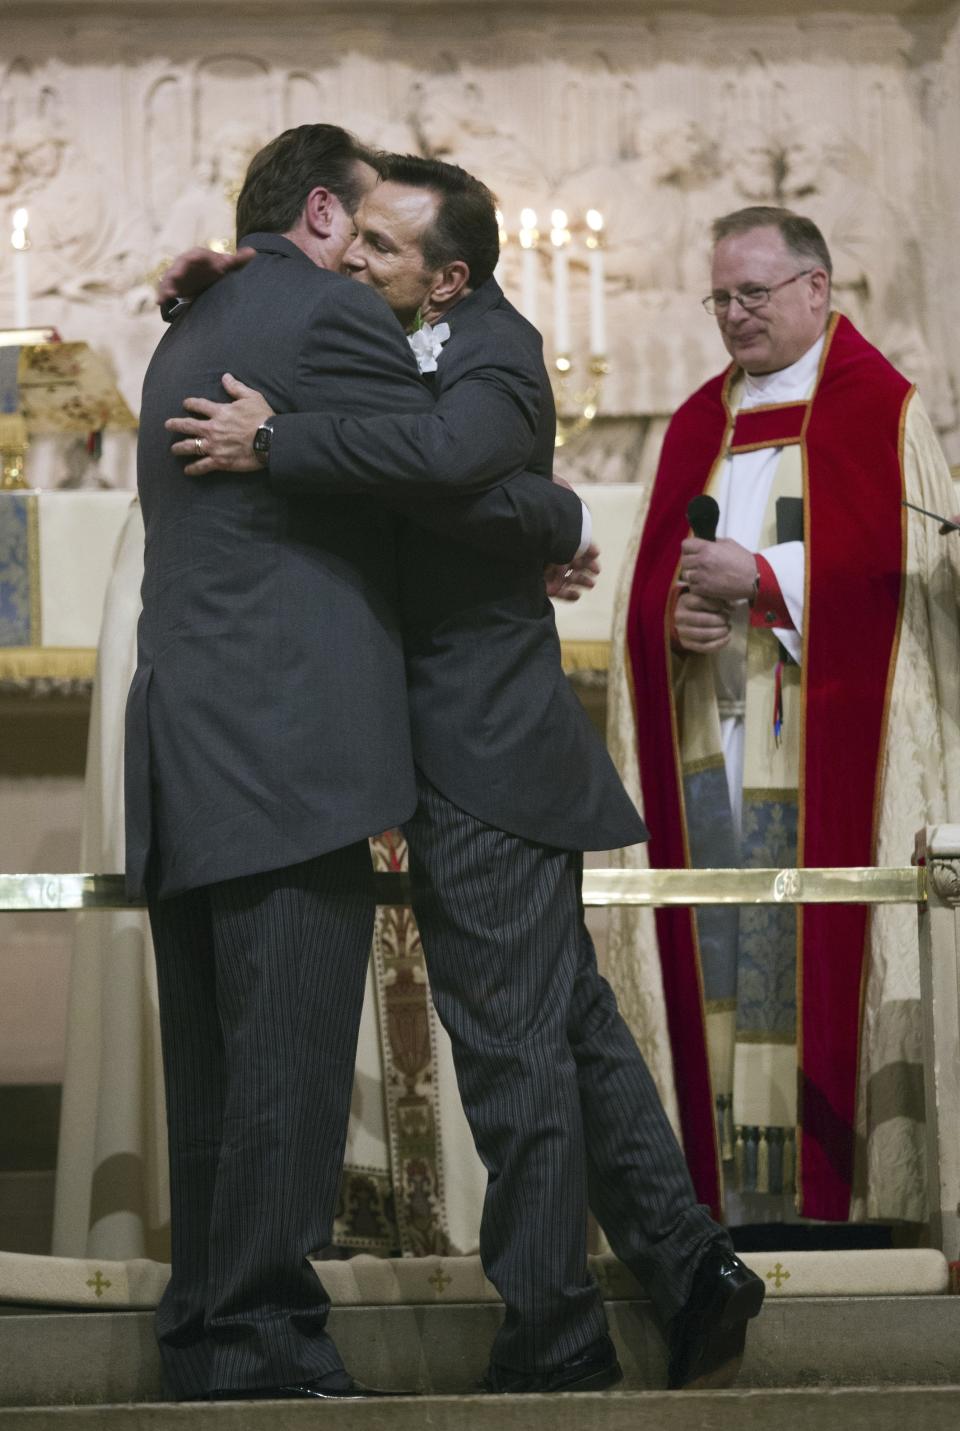 FILE - Tim Bostic, right, and Tony London hug each other after the Witnessing of the Vow ceremony at Christ & St. Luke's Episcopal Church for their wedding ceremony on Saturday, May 2, 2015 in Norfolk, Va. When the United Methodist Church removed anti-LGBTQ language from its official rules in recent days, it marked the end of a half-century of debates over LGBTQ inclusion in mainline Protestant denominations. The moves sparked joy from progressive delegates, but the UMC faces many of the same challenges as Lutheran, Presbyterian and Episcopal denominations that took similar routes, from schisms to friction with international churches to the long-term aging and shrinking of their memberships. (The' N. Pham/The Virginian-Pilot via AP, file)